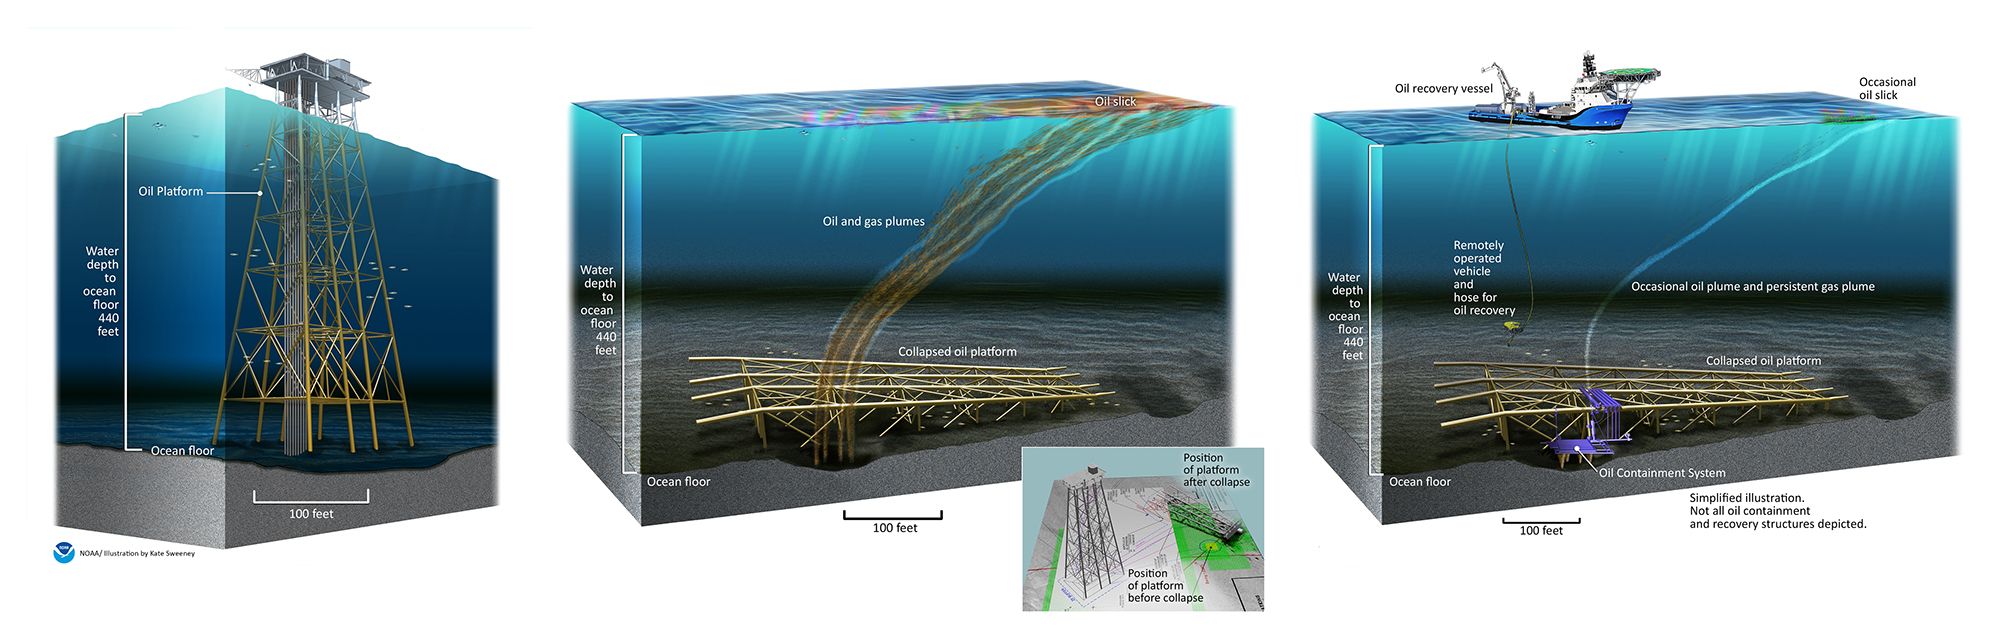 Illustrations of how the Taylor MC20 Platform in the Gulf of Mexico appeared before and after damage from Hurricane Ivan in 2004. The third panel shows the containment system installed to capture oil from persistent leaks. (September 2019 - Gulf of Mexico). 